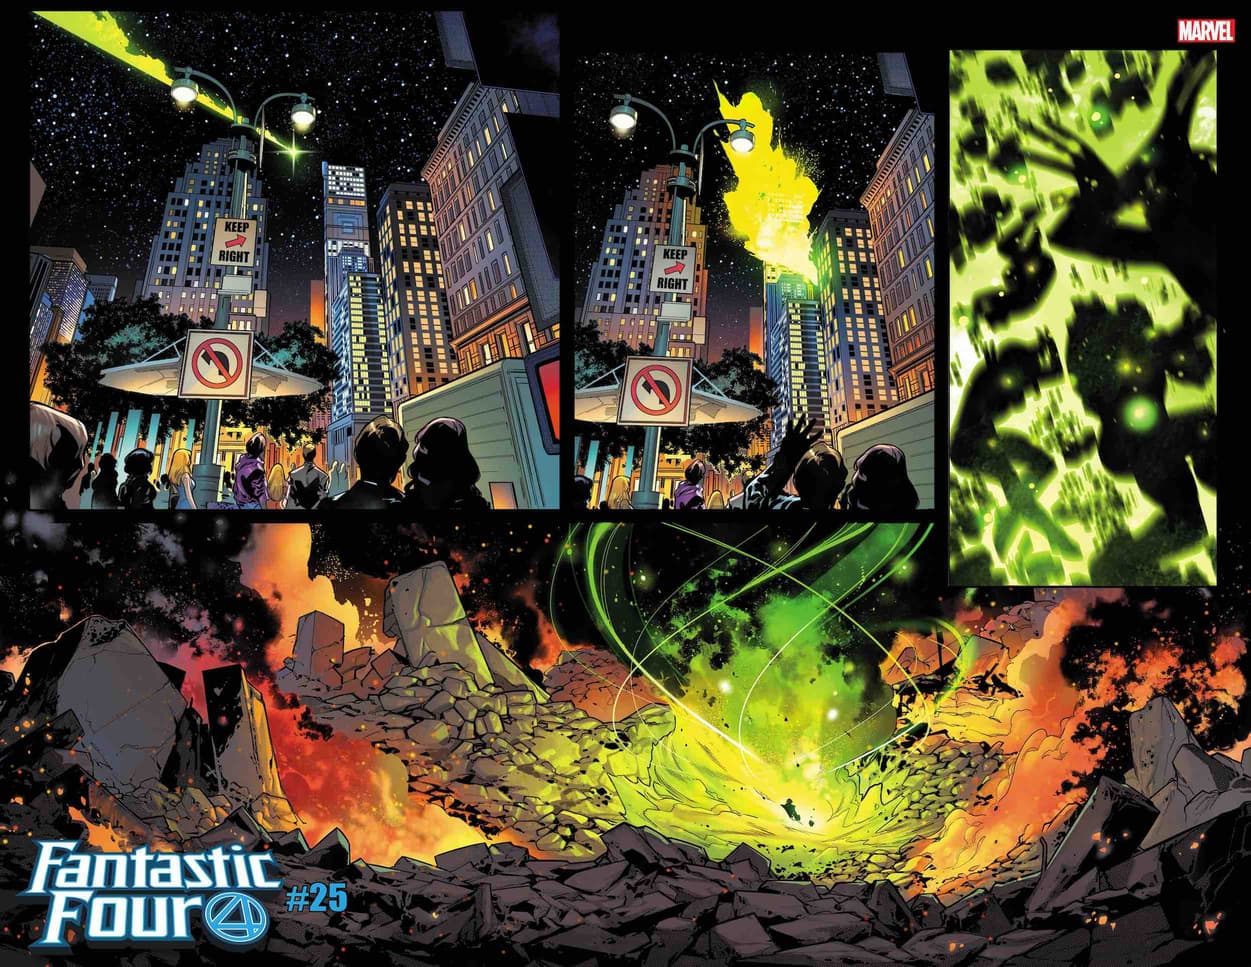 FANTASTIC FOUR #25 preview interiors by R.B. Silva with colors by Jesus Aburtov